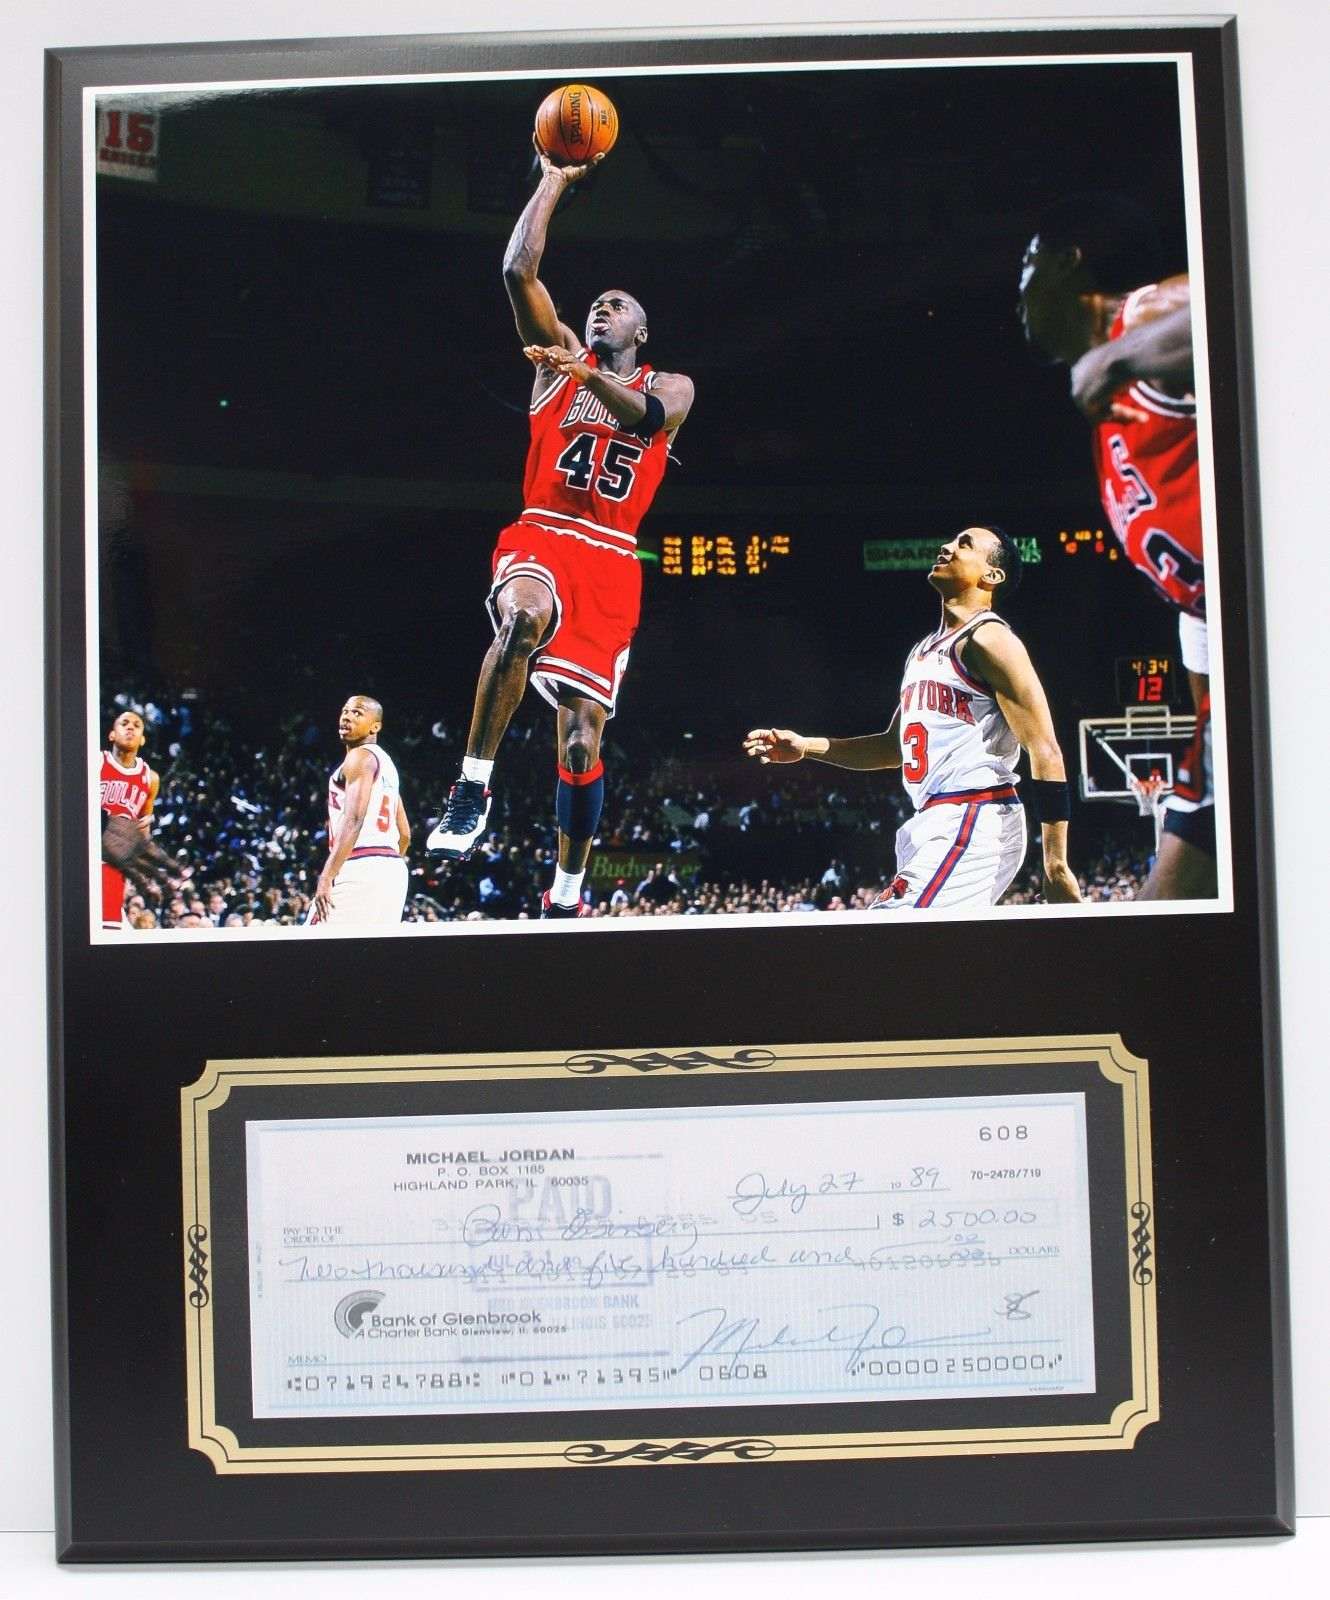 The Story Behind the Collectible: My Michael Jordan Signed Jersey